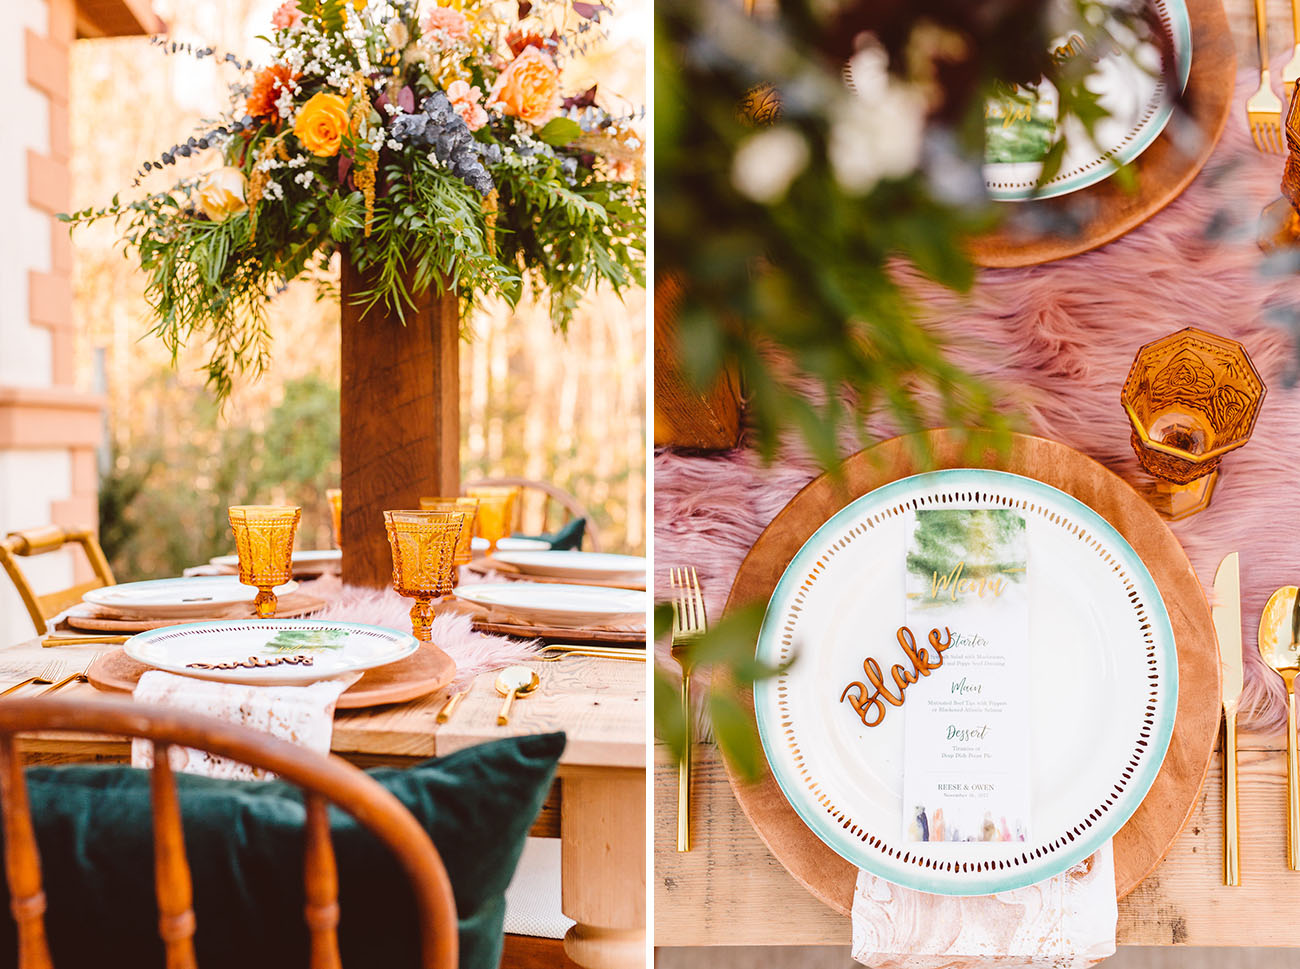 The tablescape was done with a tall floral centerpiece, amber glasses, gold flatware and printed napkins